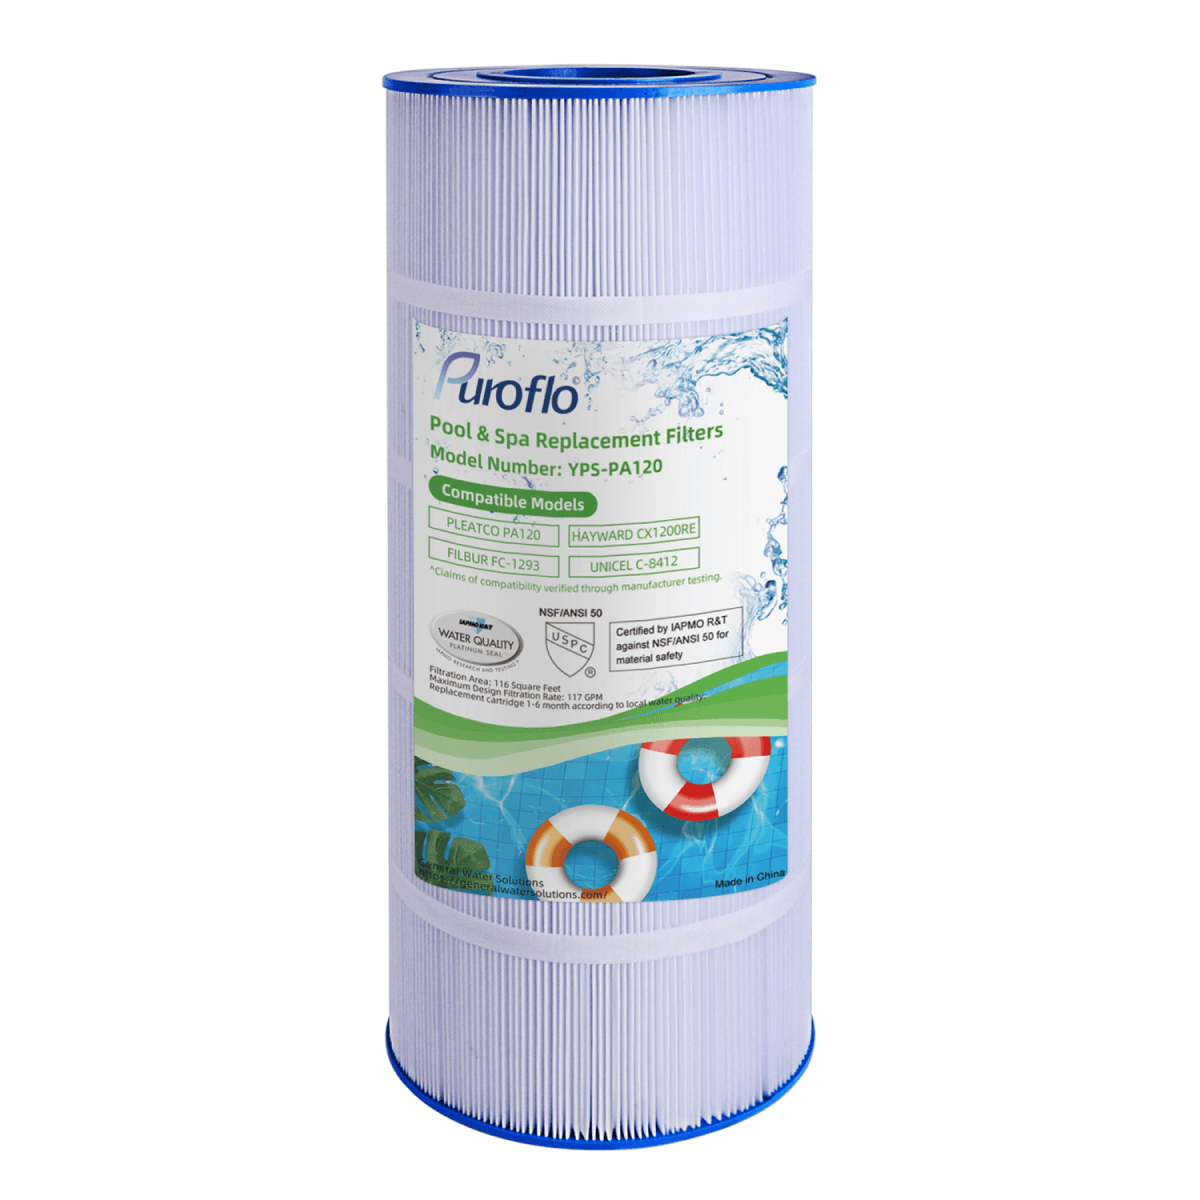 Puroflo Pool Filter Replacement for Pleatco PA120, Unicel C-8412, Filbur FC-1293 (1 Pack)